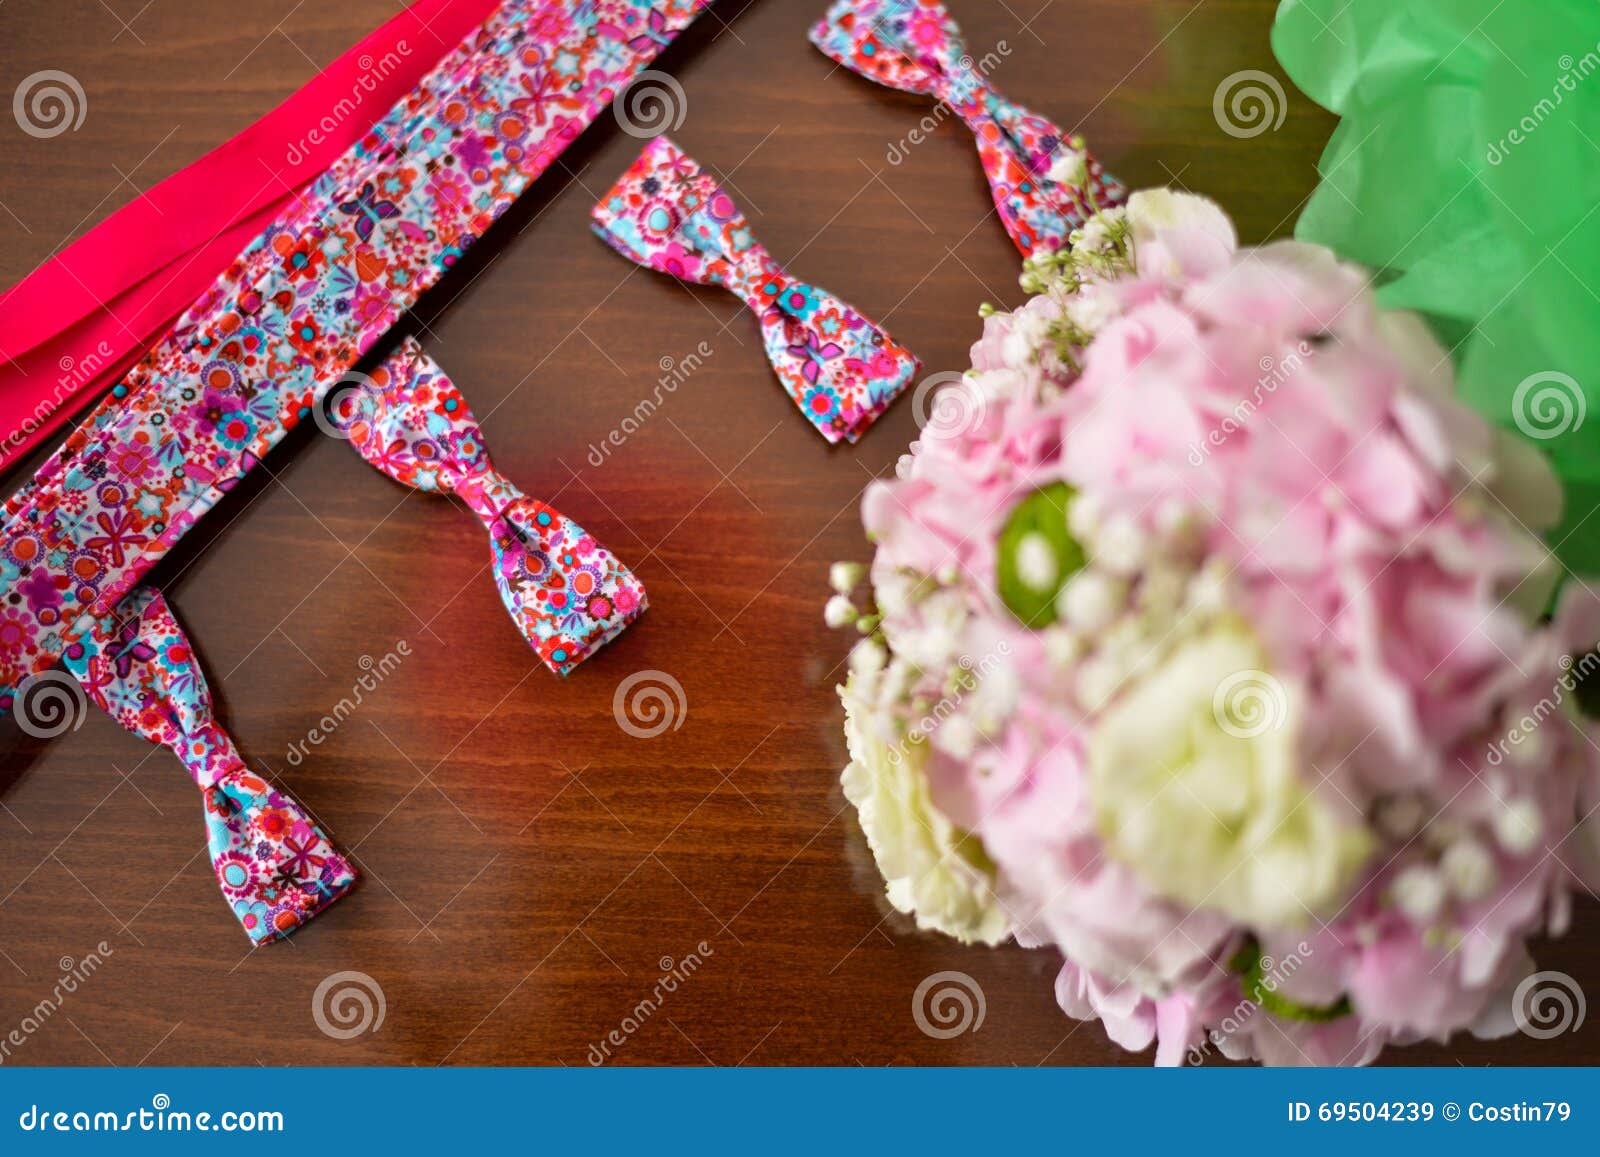 Four colorful bow ties stock image. Image of colorful - 69504239